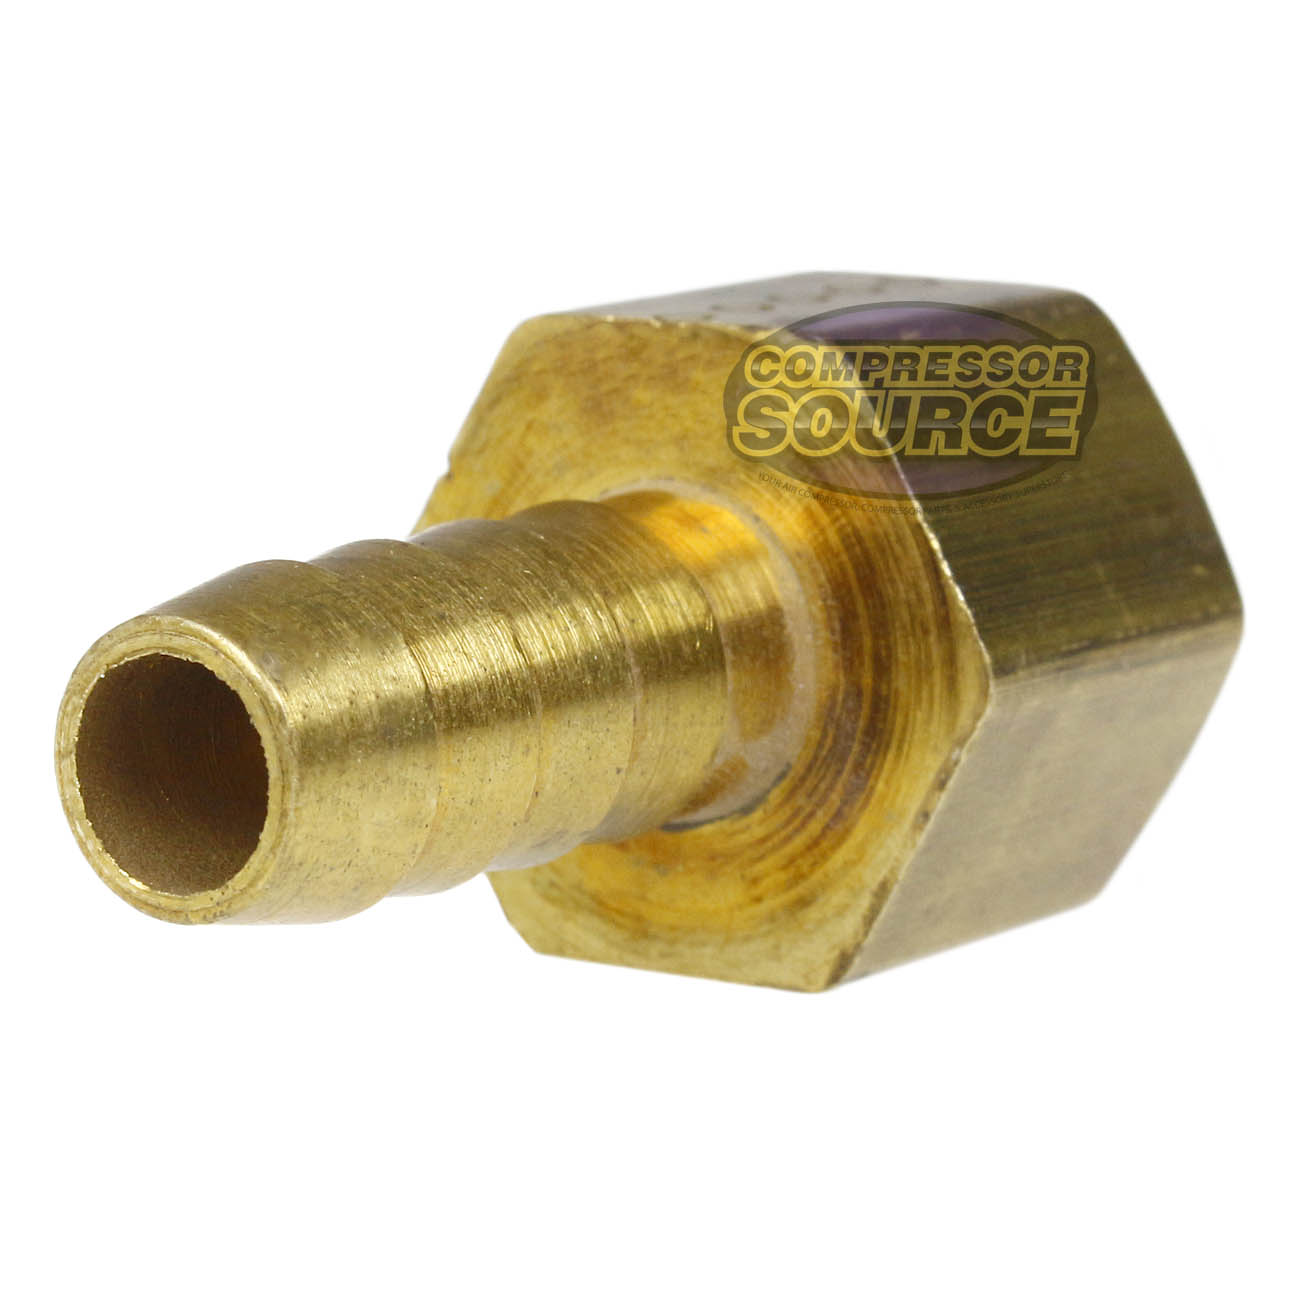 3/8" x 3/8" Hose Barb x Female Adapter 5 Pack Solid Brass Connector 221EEE-5Pack